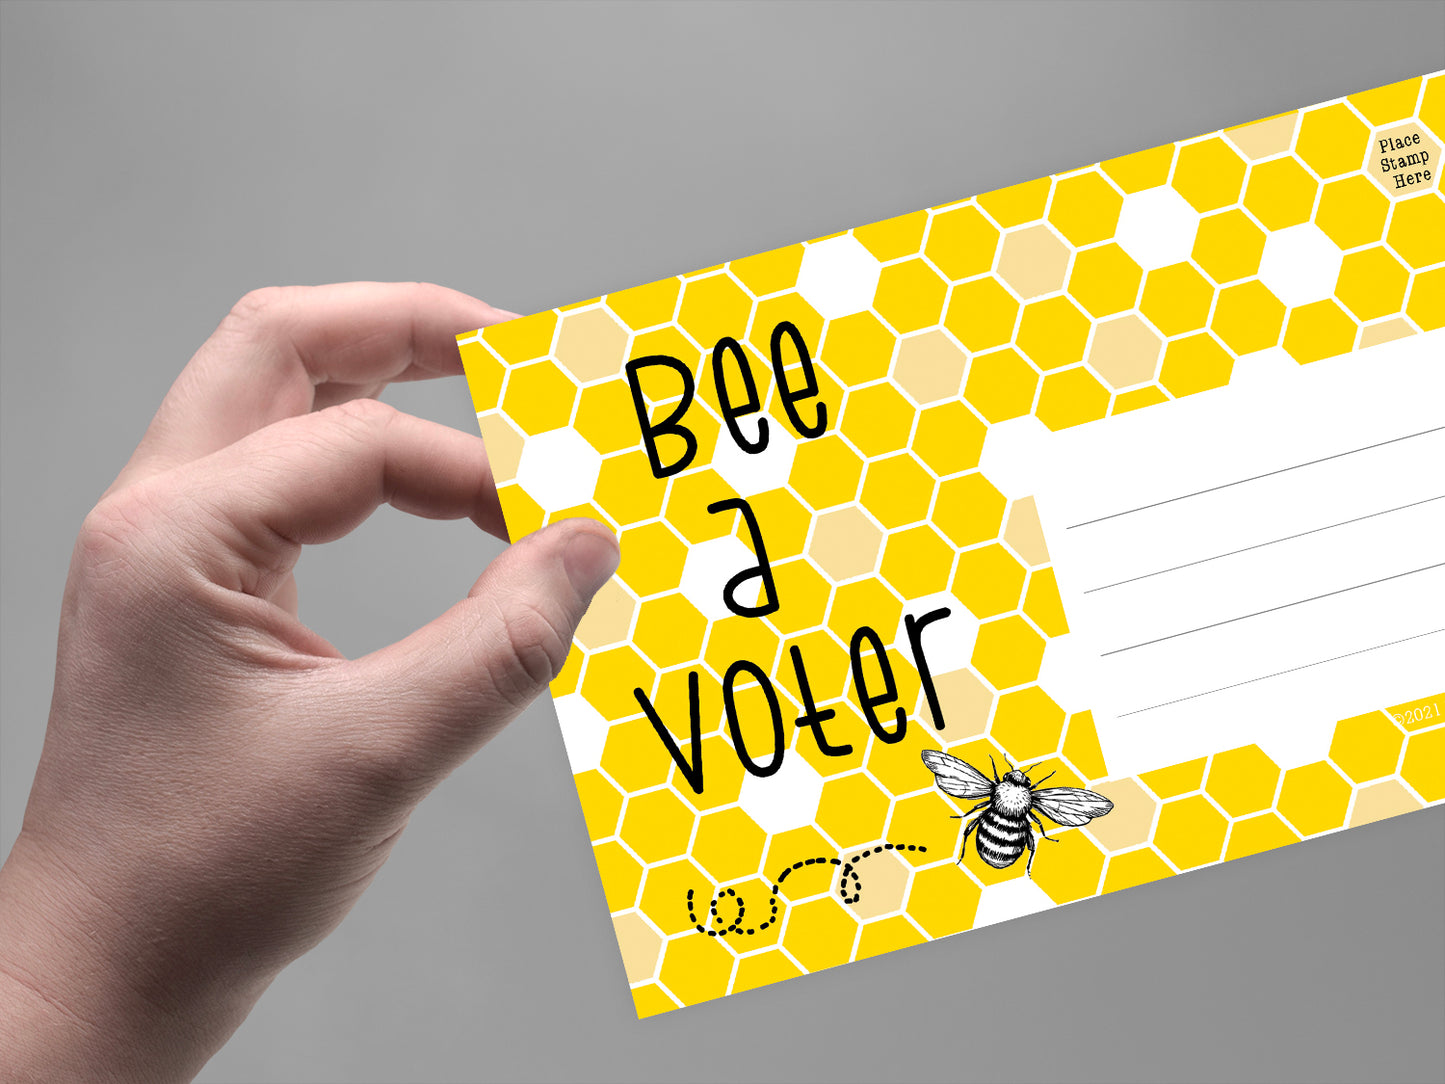 Bee A Voter Blank 4x6 Voter Postcard (100 Pack)